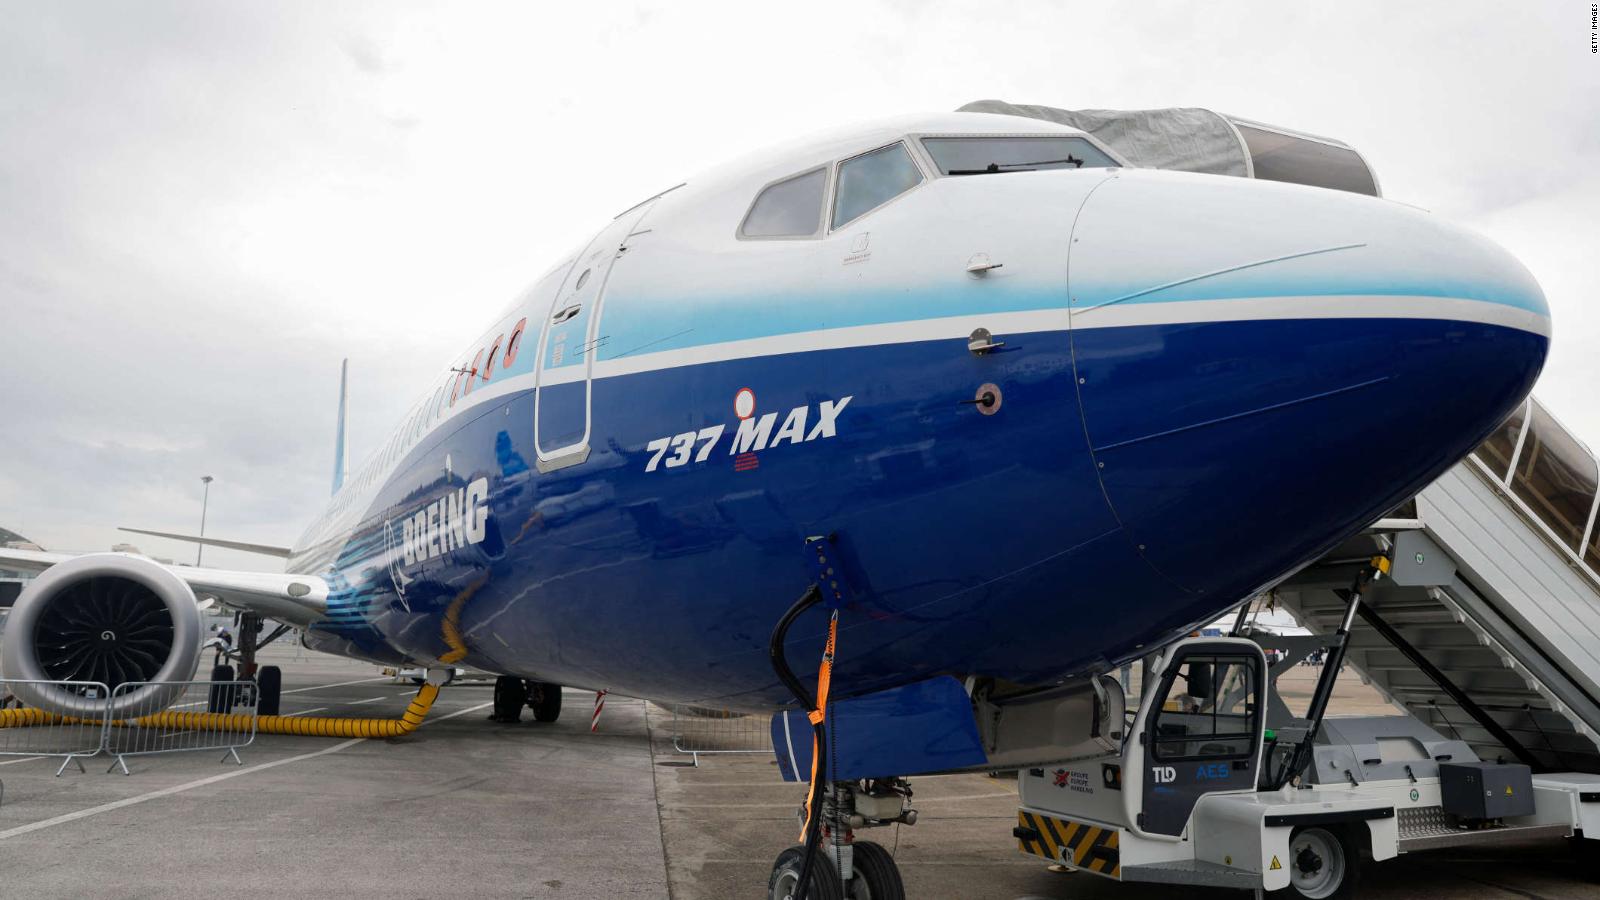 Boeing has fired the head of its 737 Max aircraft division